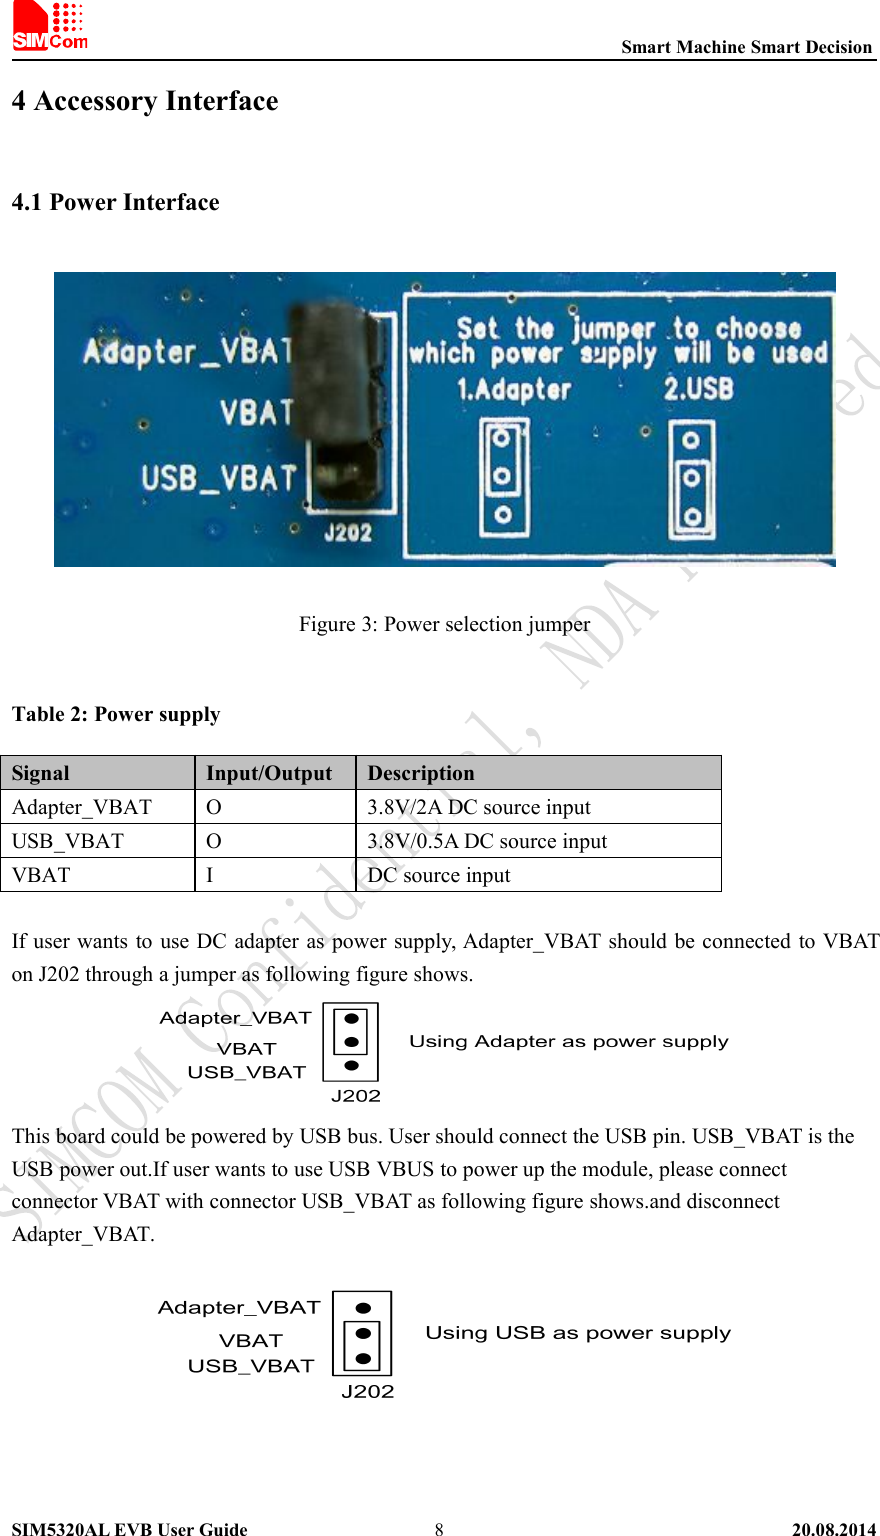 Smart Machine Smart DecisionSIM5320AL EVB User Guide 20.08.201484 Accessory Interface4.1 Power InterfaceFigure 3: Power selection jumperTable 2: Power supplySignal Input/Output DescriptionAdapter_VBAT O 3.8V/2A DC source inputUSB_VBAT O 3.8V/0.5A DC source inputVBAT I DC source inputIf user wants to use DC adapter as power supply, Adapter_VBAT should be connected to VBATon J202 through a jumper as following figure shows.This board could be powered by USB bus. User should connect the USB pin. USB_VBAT is theUSB power out.If user wants to use USB VBUS to power up the module, please connectconnector VBAT with connector USB_VBAT as following figure shows.and disconnectAdapter_VBAT.